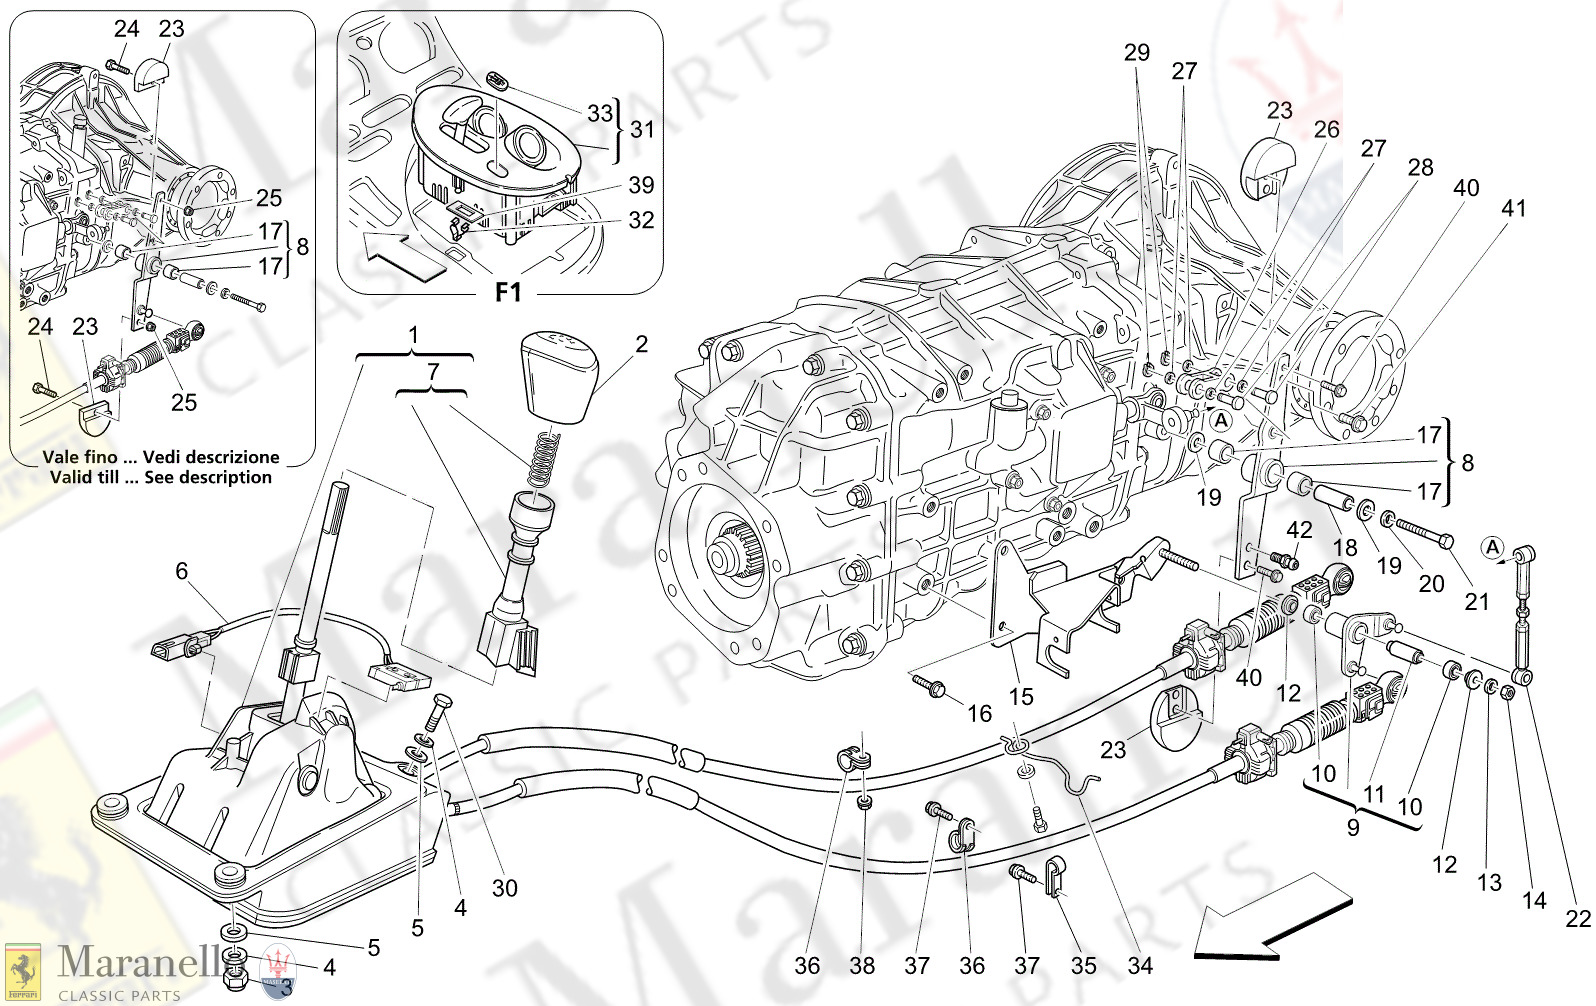 M3.03 - 13 - M303 - 13 Driver Controls For Gearbox